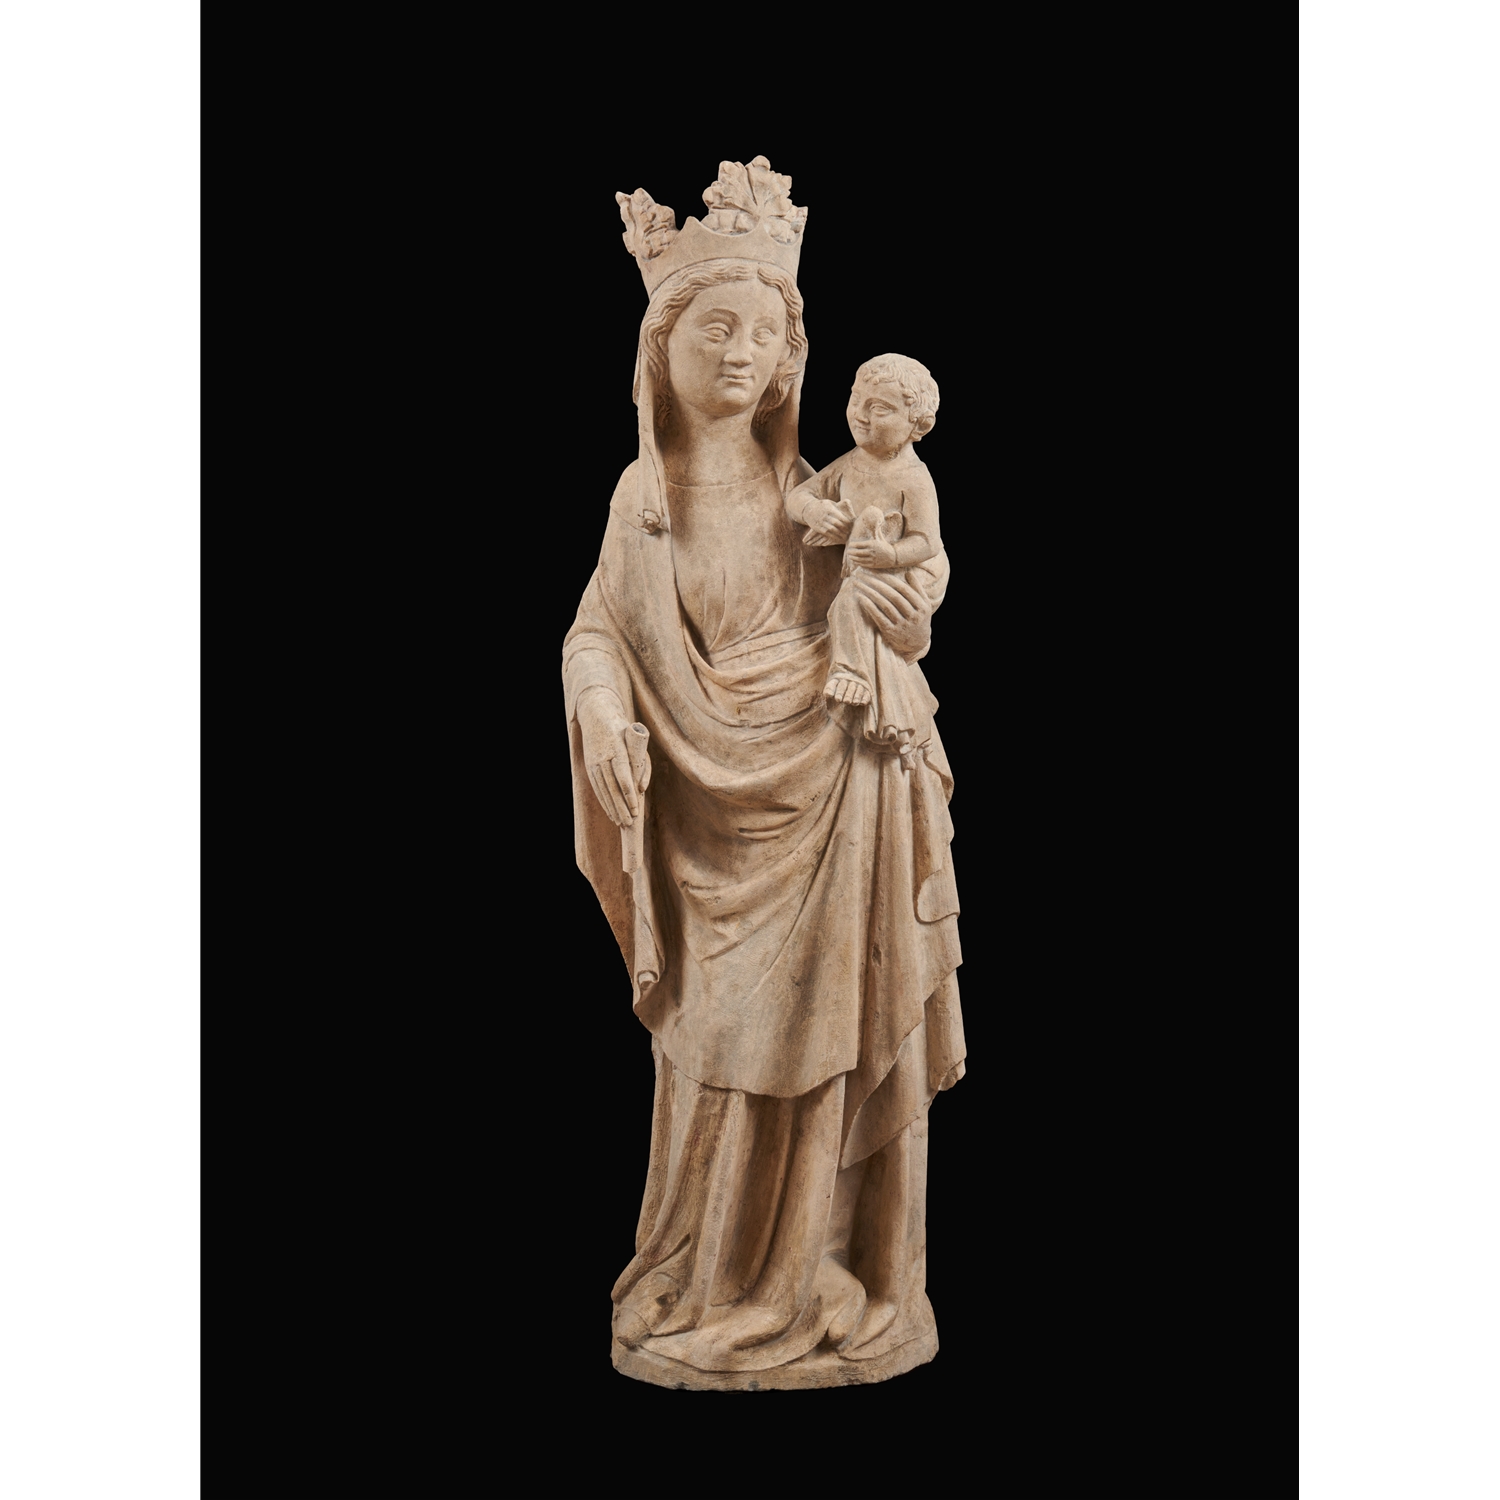 VIRGIN AND CHILD ÎLE-DE-FRANCE SECOND QUARTER OF THE 14TH CENTURY